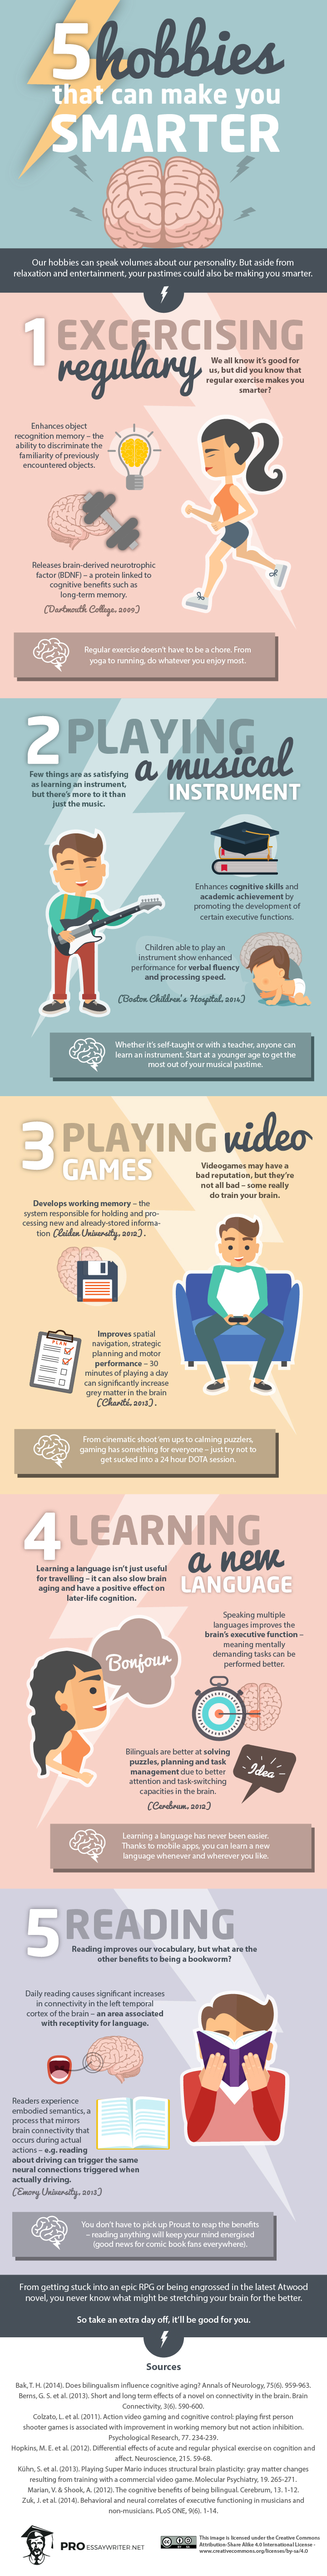 5-hobbies-that-can-make-you-smarter